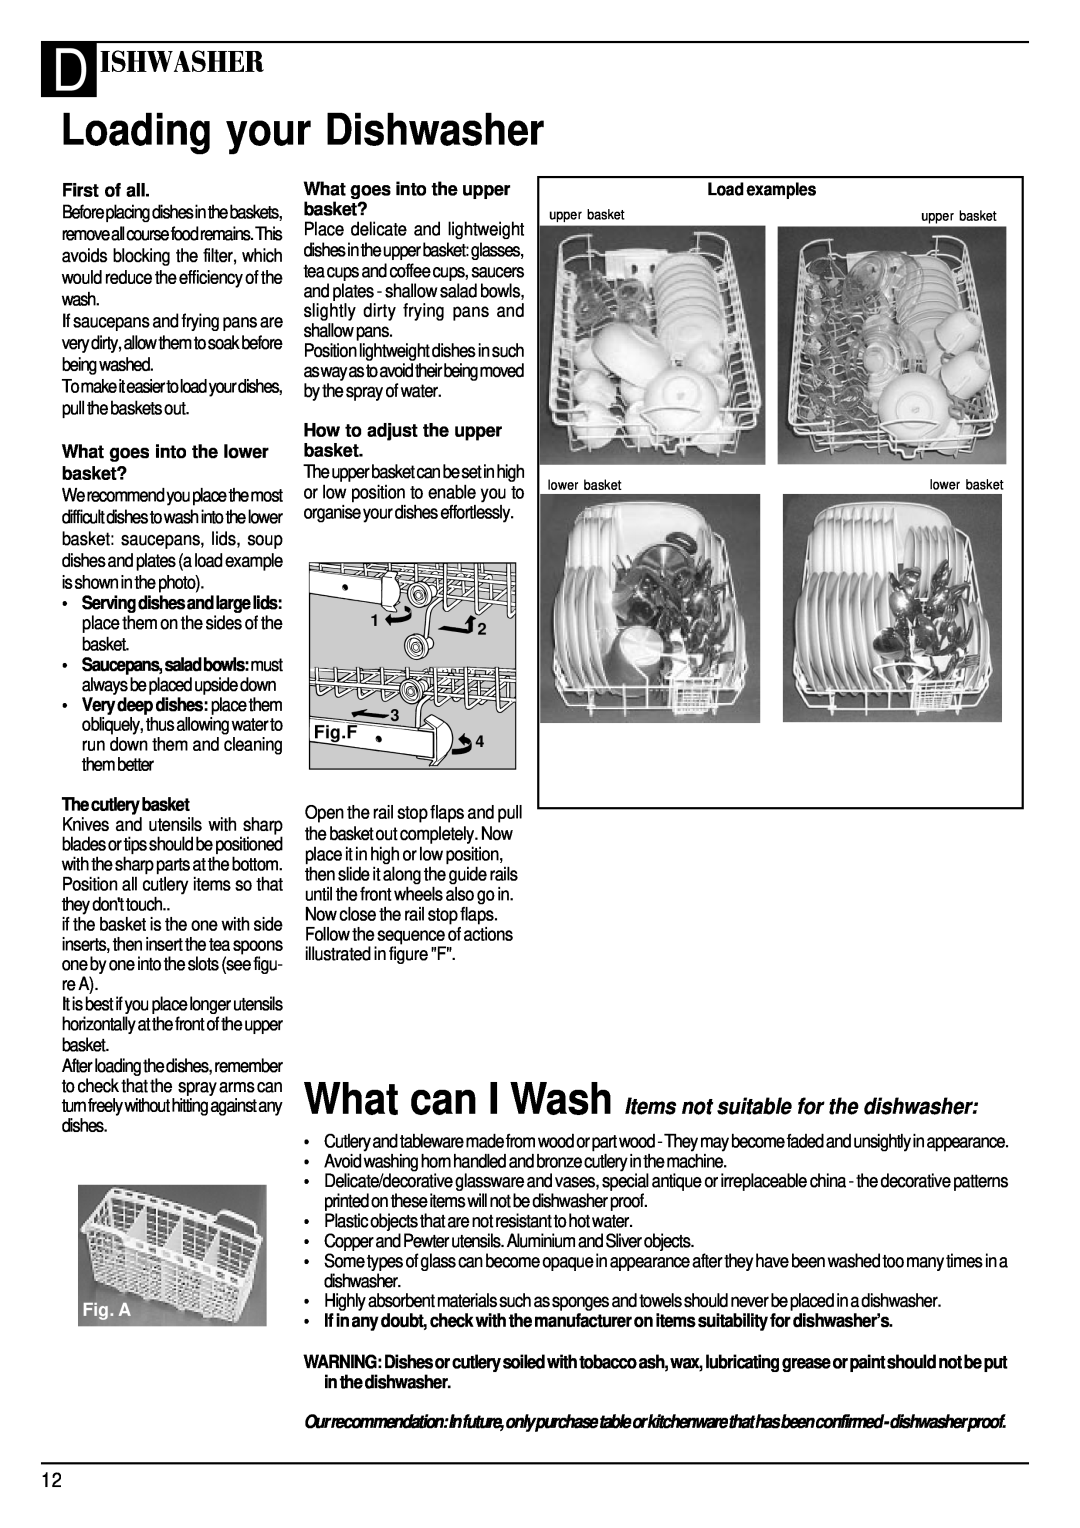 Hotpoint SDW 60 Loading your Dishwasher, D Ishwasher, What can I Wash Items not suitable for the dishwasher, First of all 